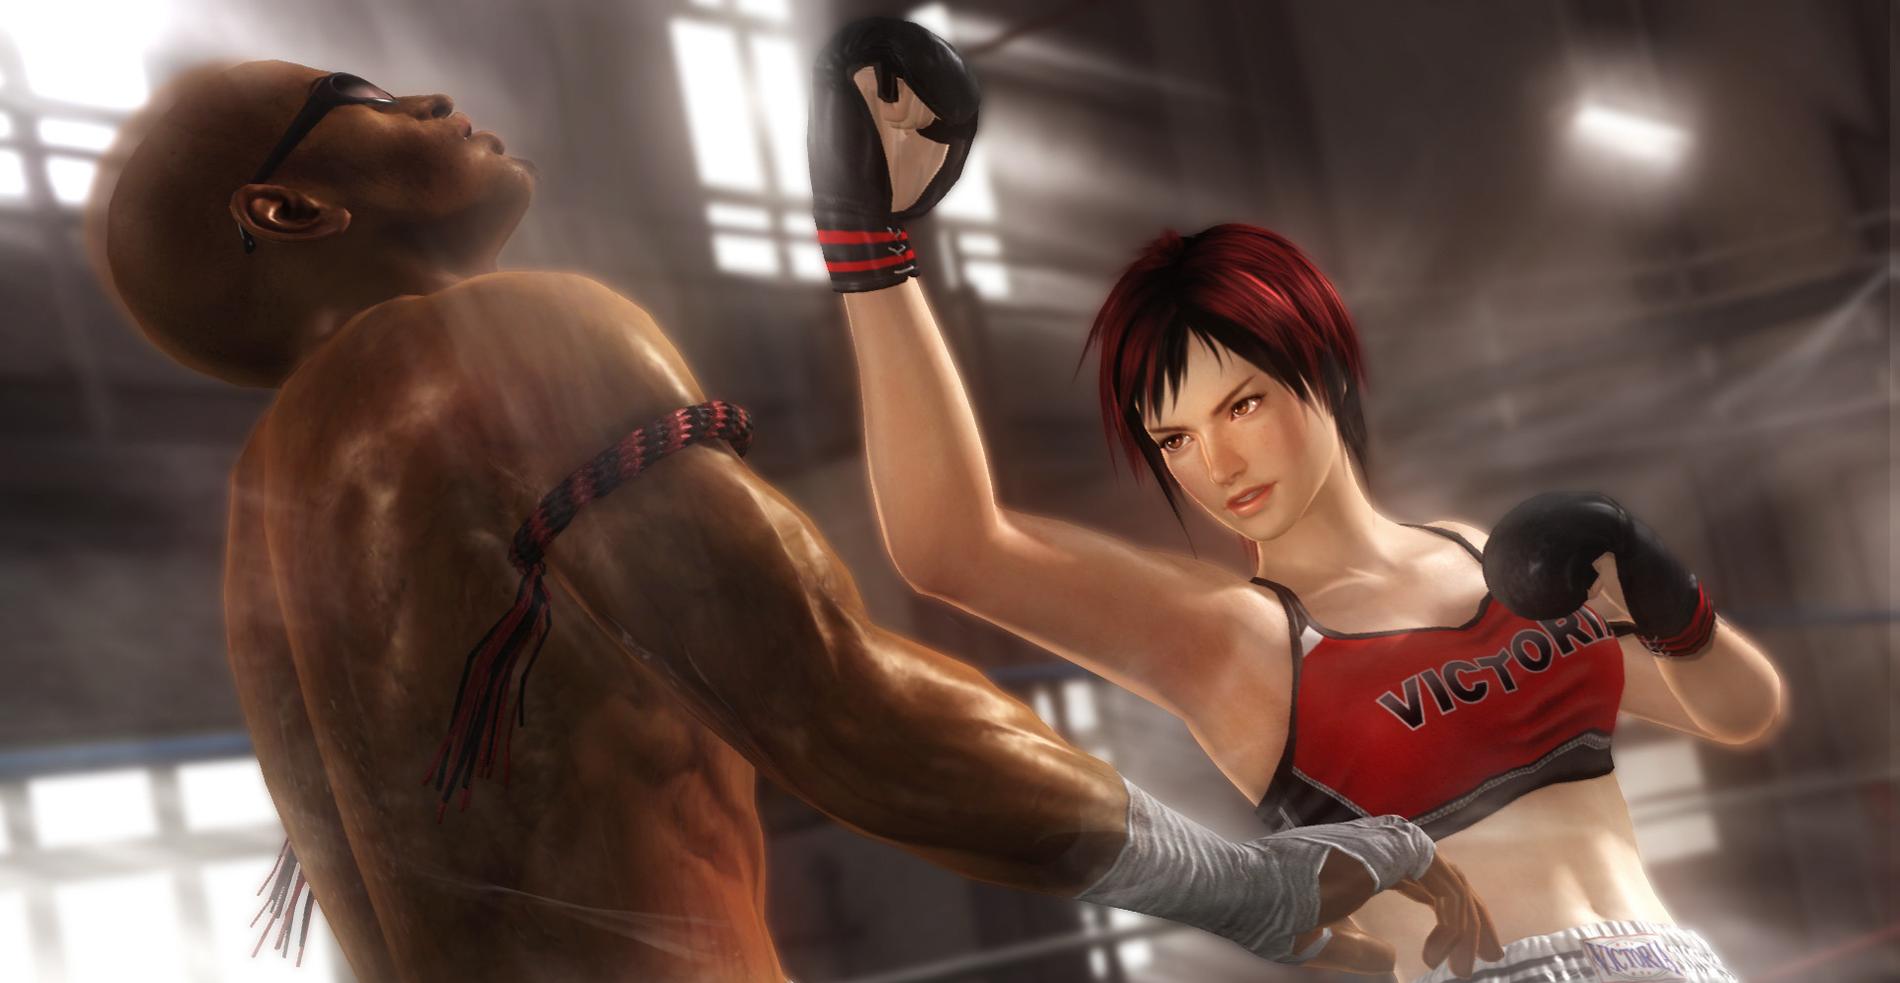 ”Dead or alive 5”.